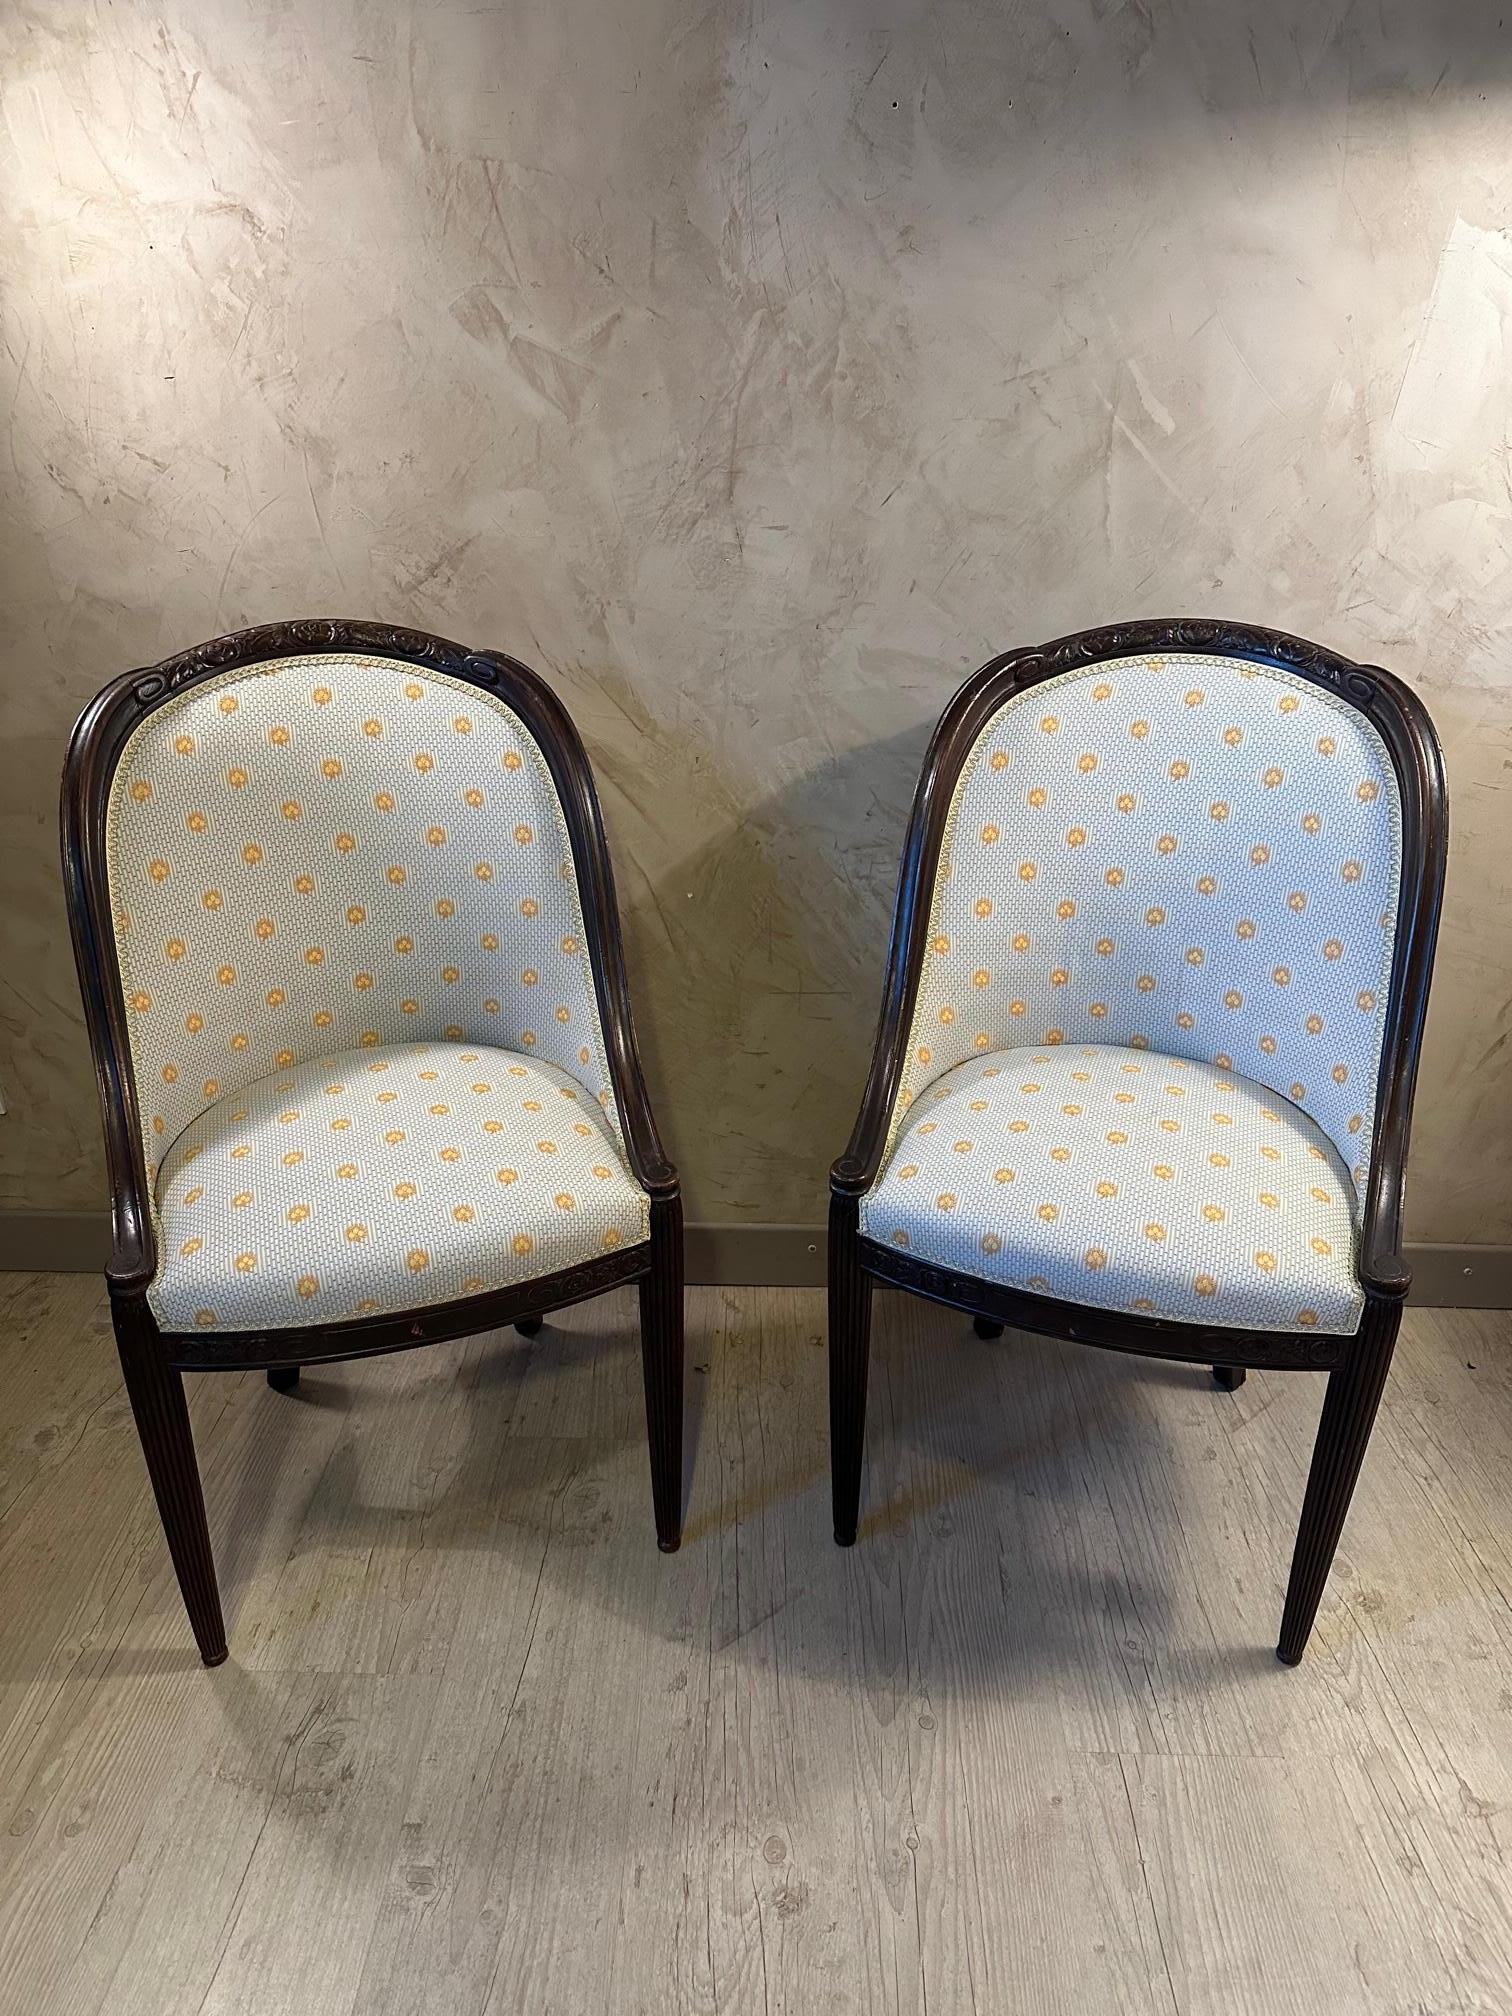 Very beautiful pair of art deco armchairs in very good condition dating from 1925. Light blue cotton fabric and yellow pattern, flat chain braid finish. Bouquet of engraved flowers typical of the art deco period in the wood on the top of the